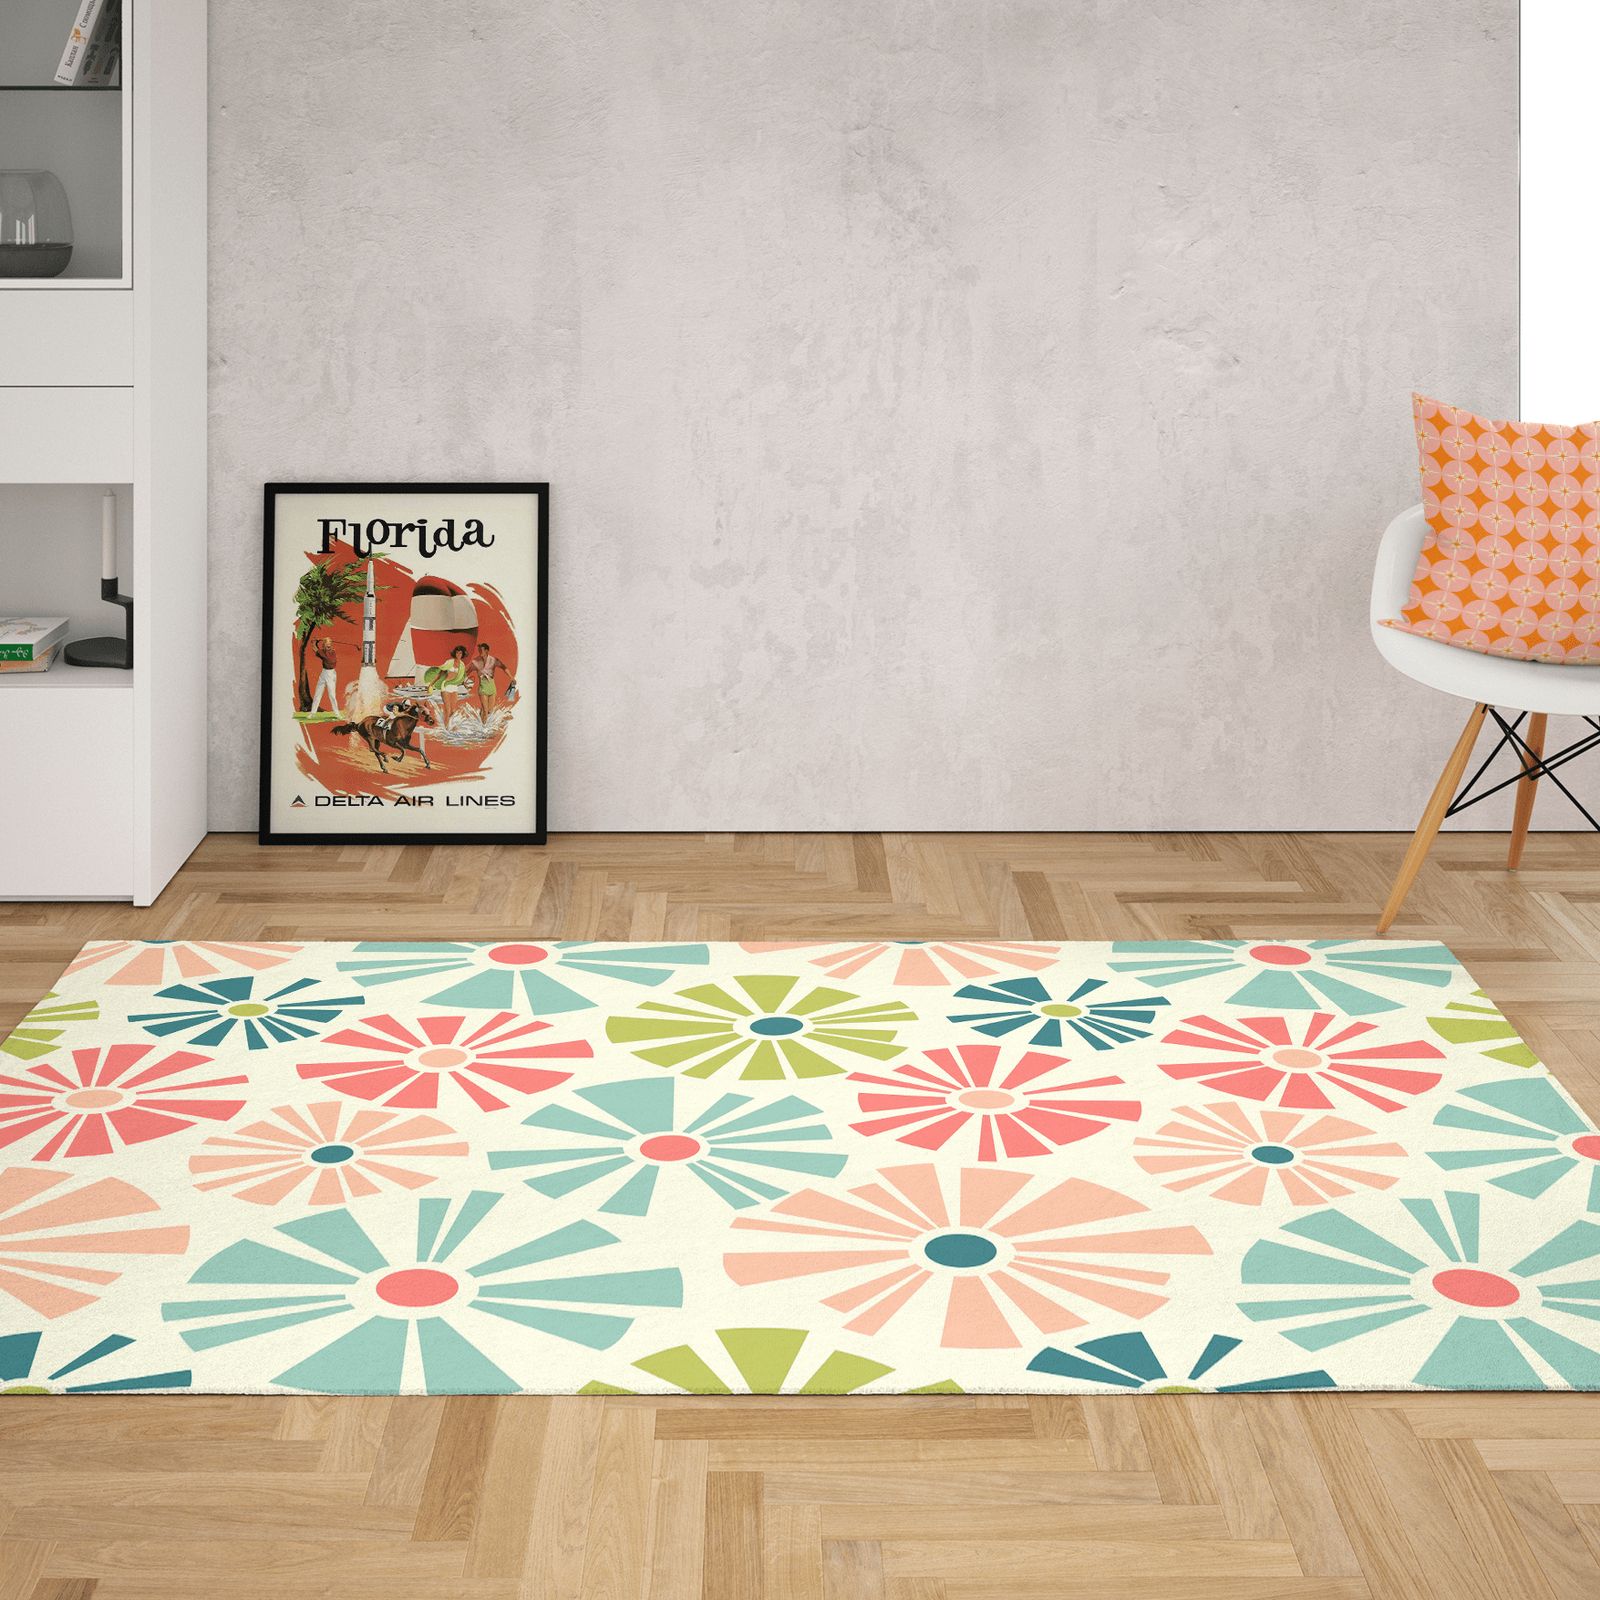 Retro Coral Olive Aqua Teal Pink Beige Mod Groovy Floral Area Rug | Ebay Intended For Pink And Aqua Rugs (View 7 of 15)